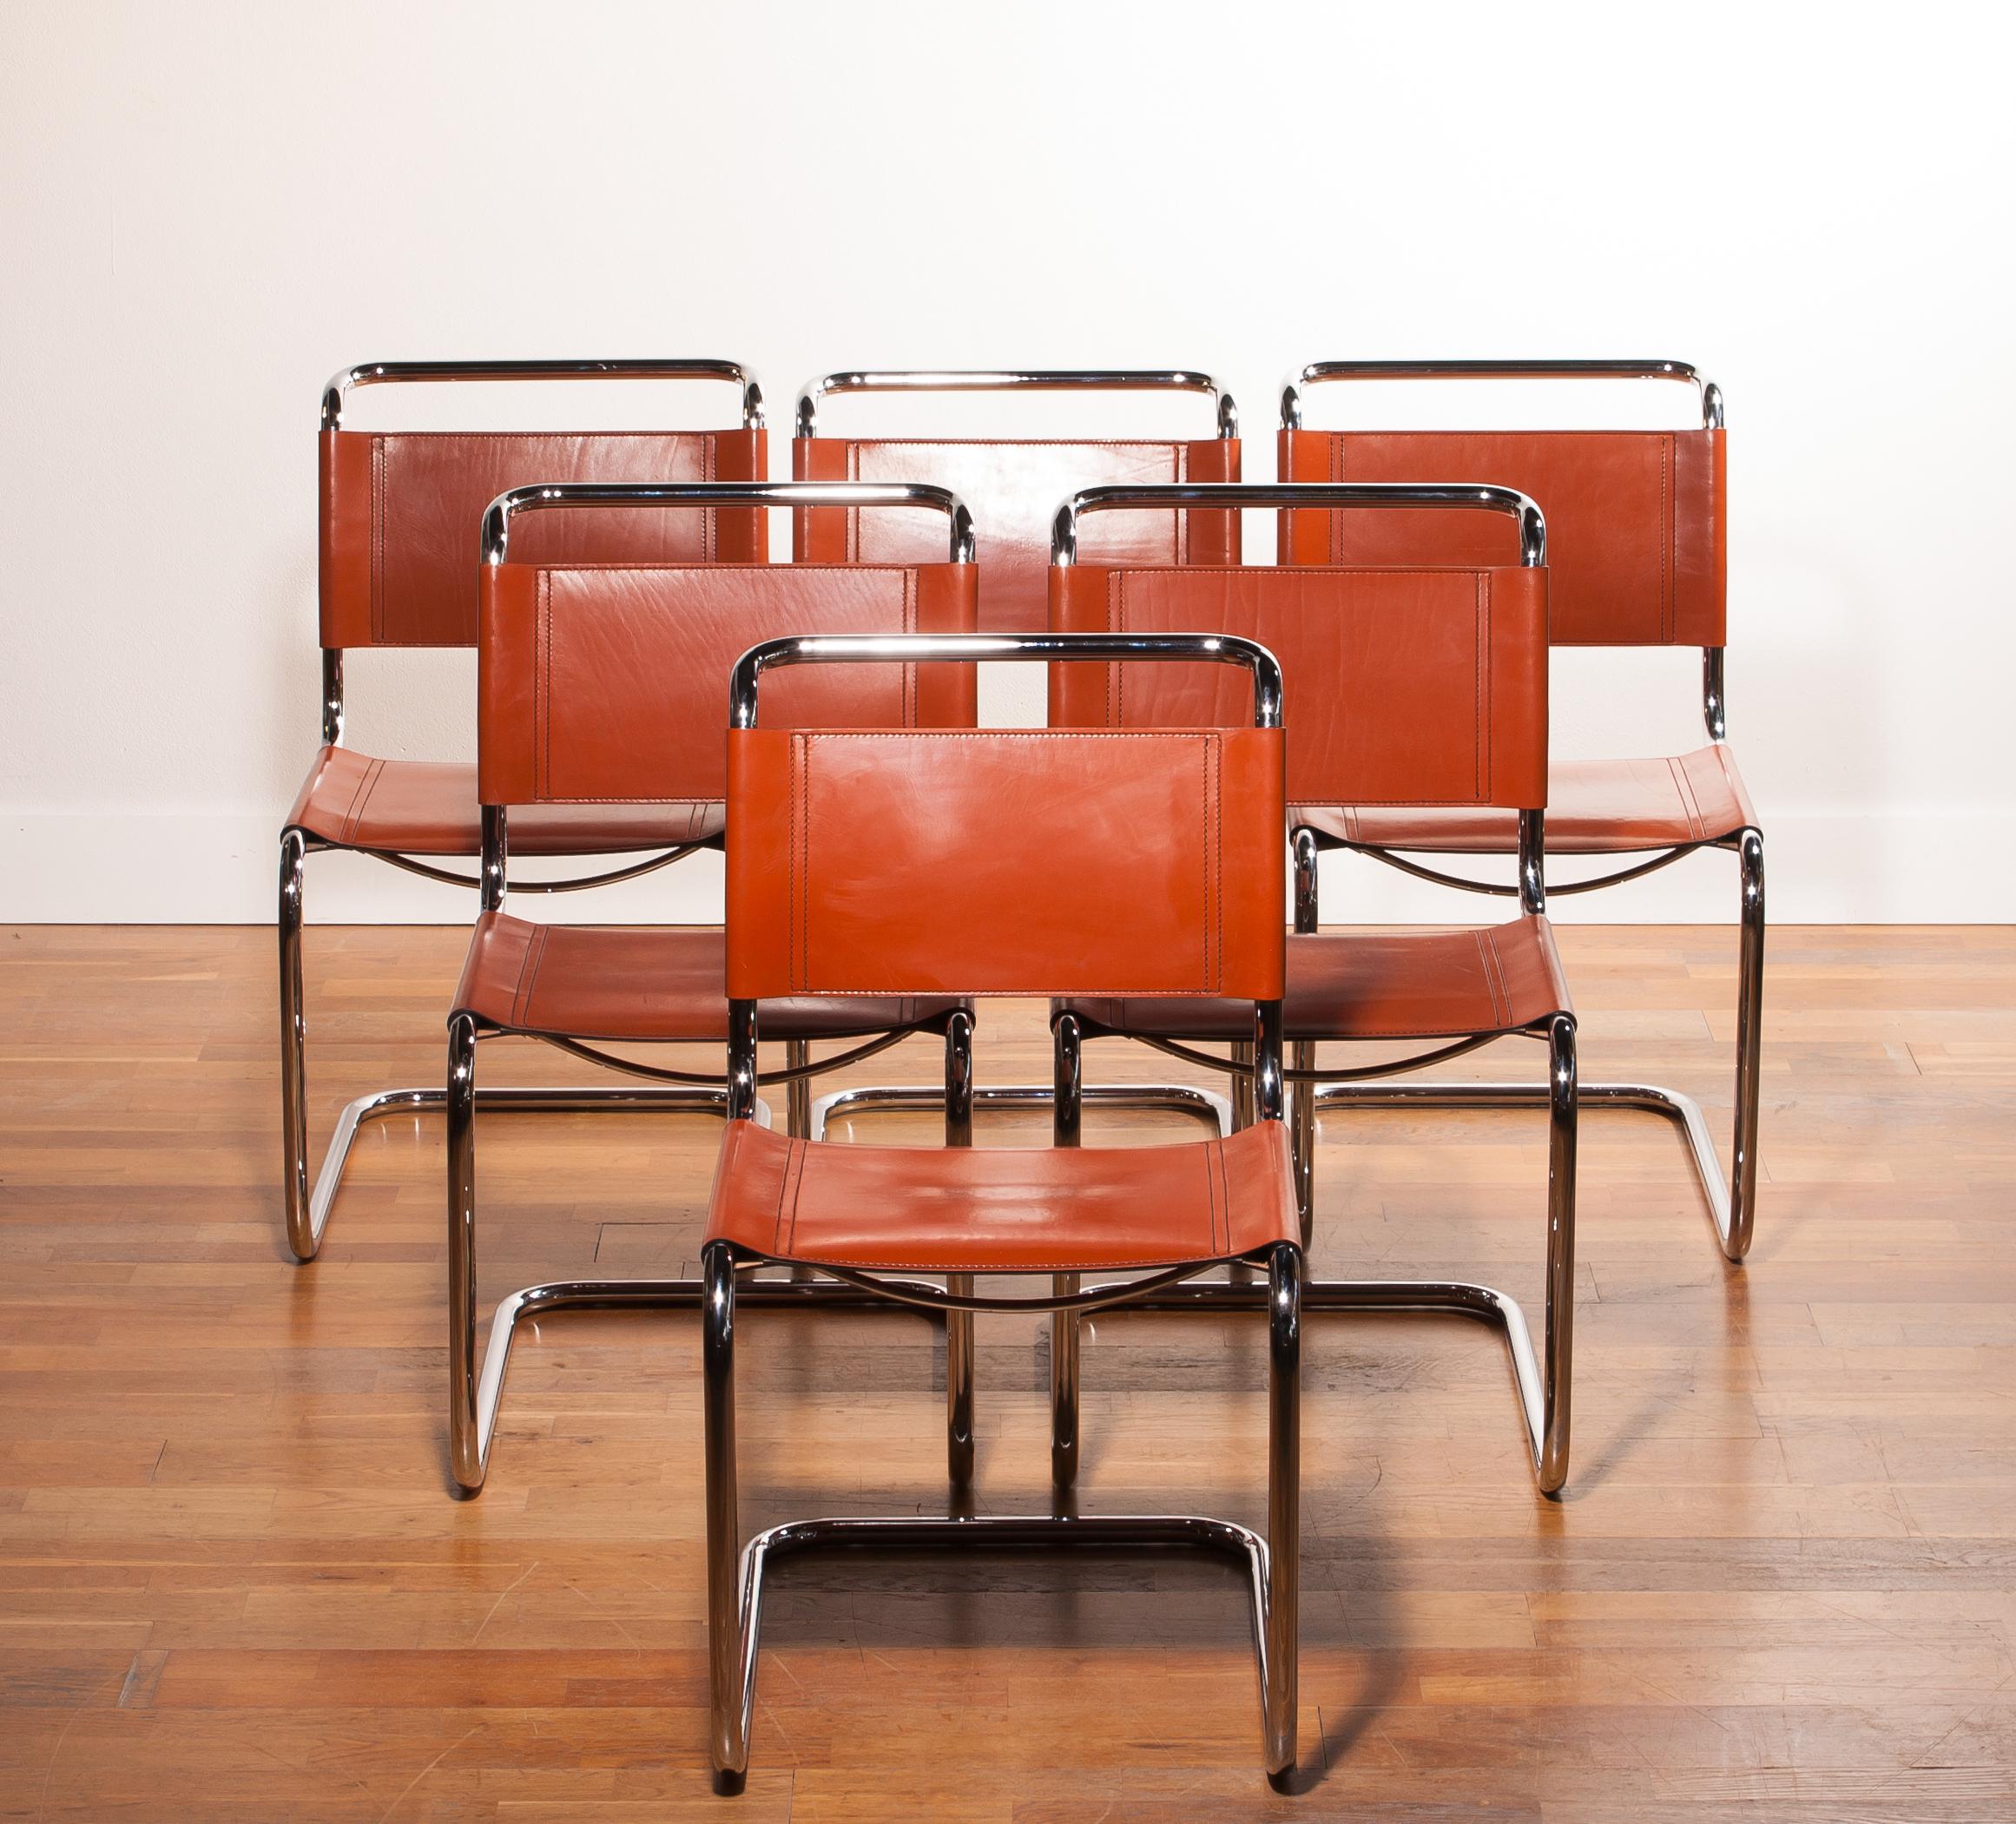 A beautiful set of six dining chairs designed by Mart Stam for Fasem.
These chairs have a cantilevered tubular metal frame with cognac saddle leather seating and backrest.
They are in a wonderful condition.
The chairs are marked with 'Fasem